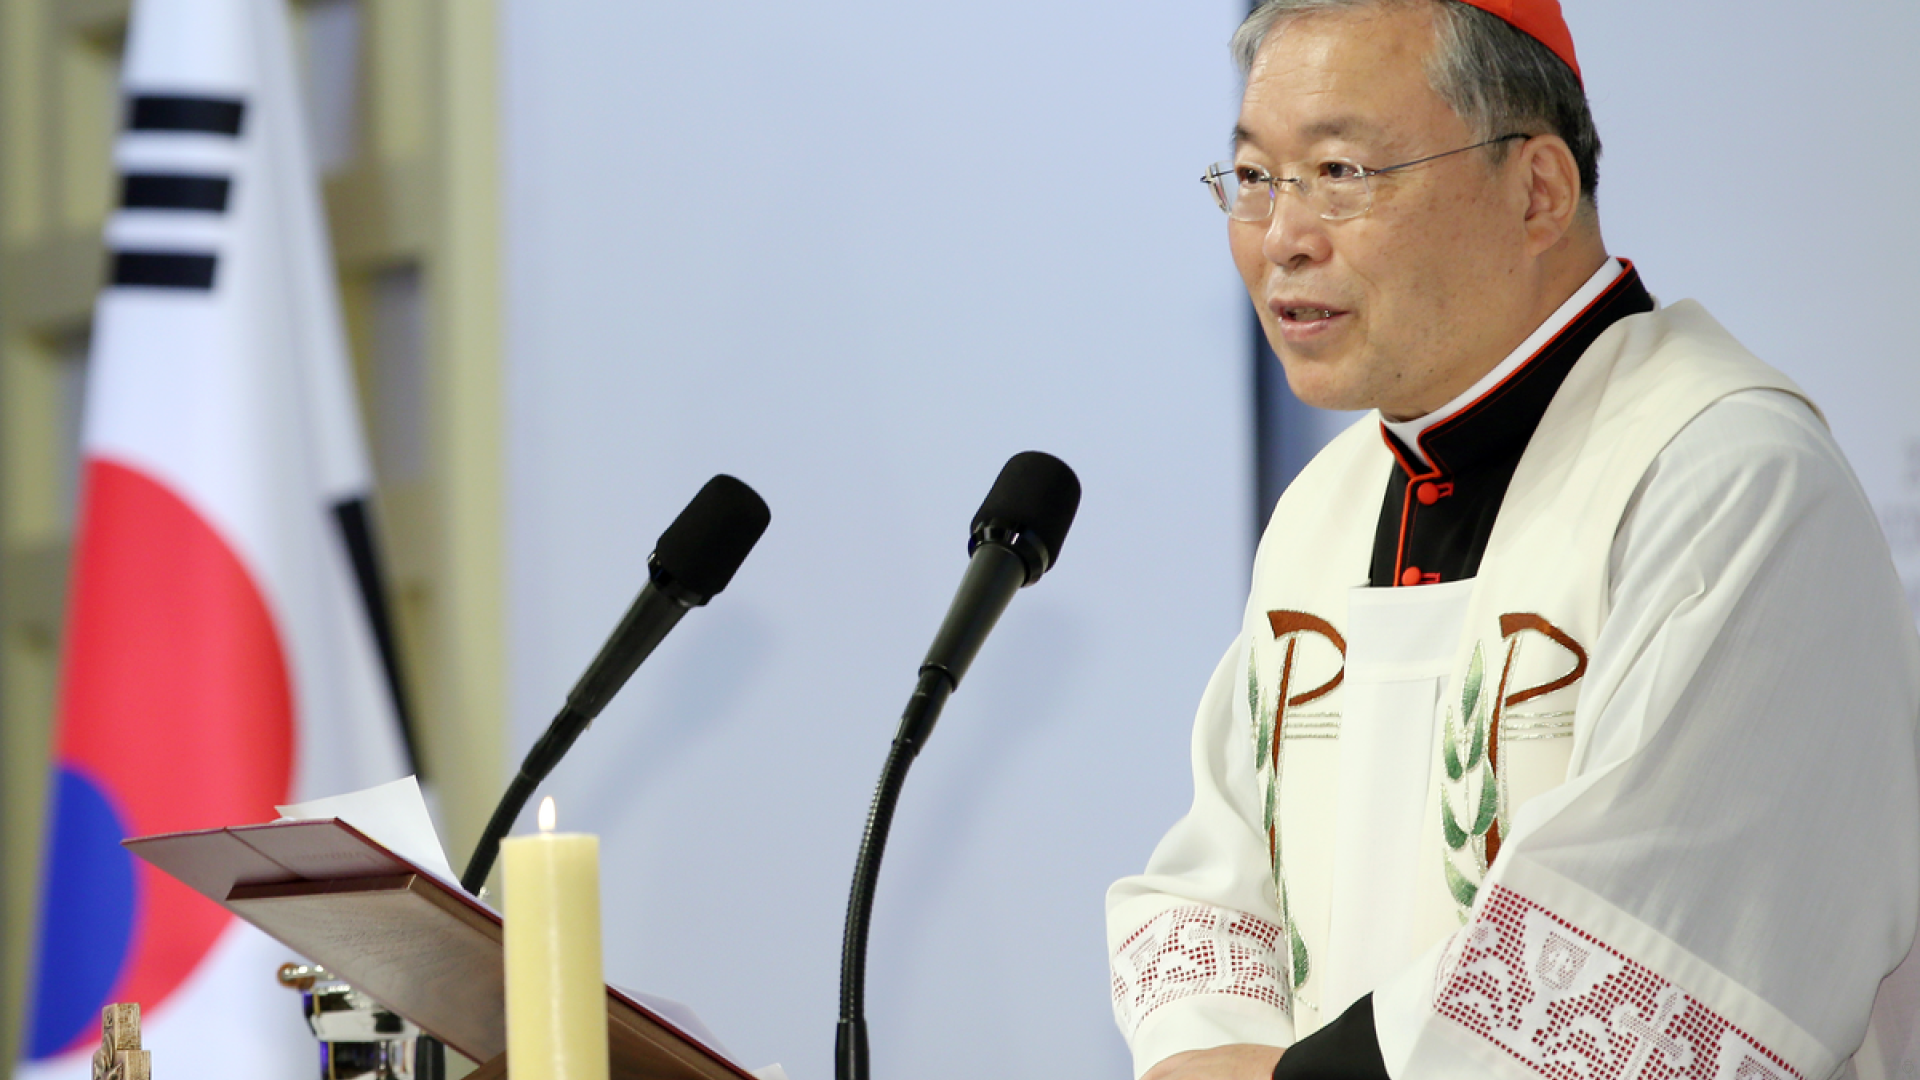 A Recap of the Birth of Catholicism in the Korean Peninsula | FSSPX News